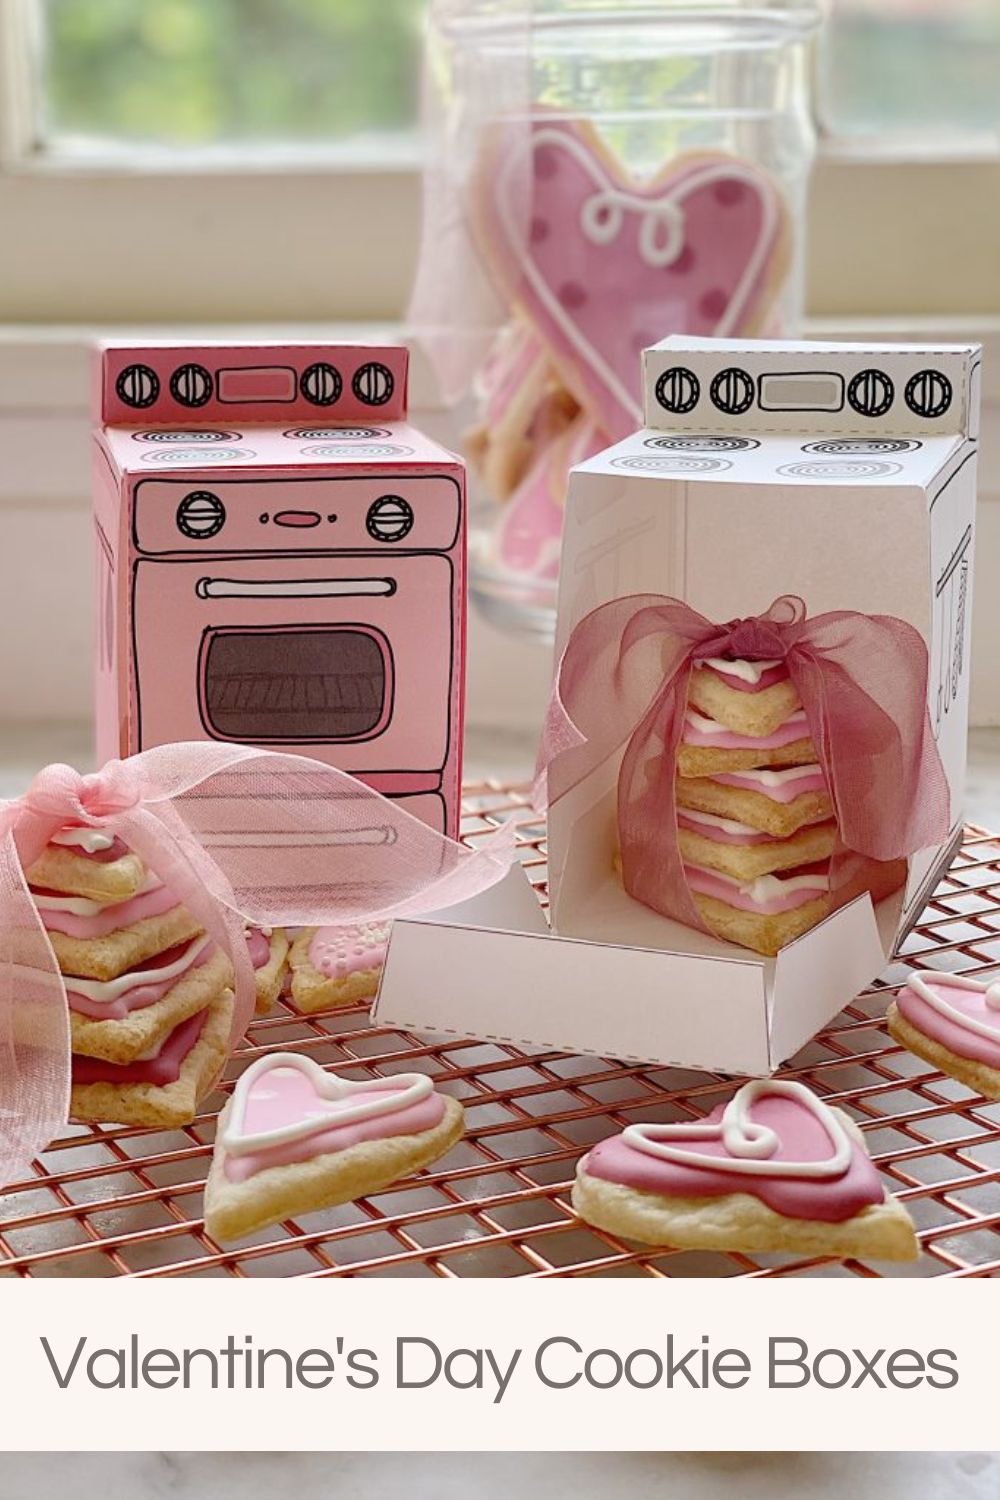 I think cookies always taste best when they are fresh from the oven. I found some Valentine's Day Cookie Boxes that guarantee your cookies are always fresh from the oven.